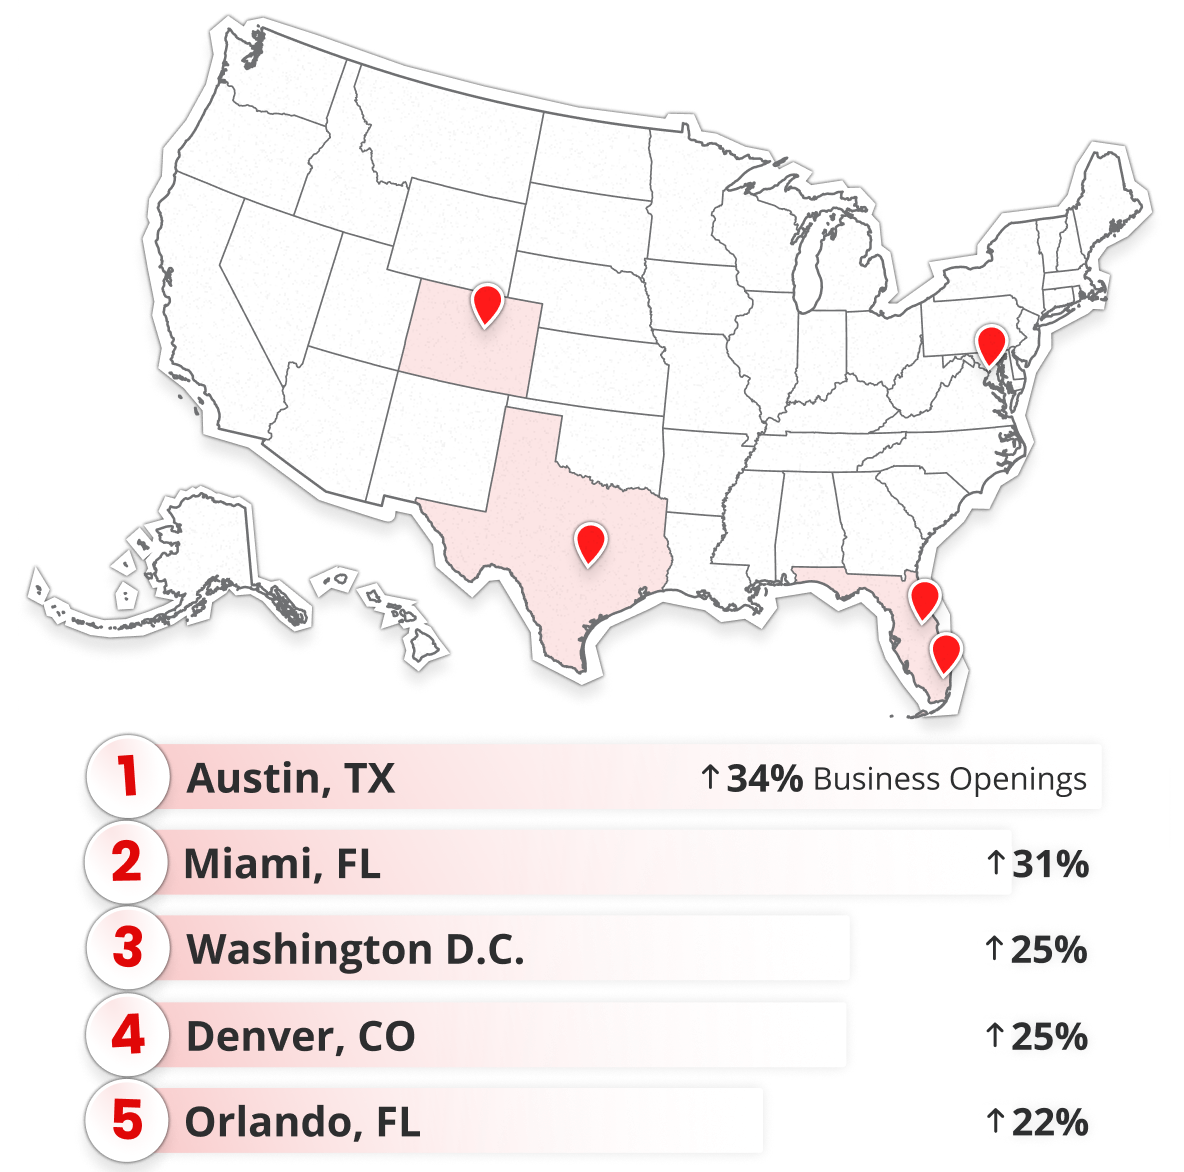 The top metros for growth in women-owned businesses were Austin, TX, Miami, FL, Washington, D.C., Denver, CO, and Orlando, FL.